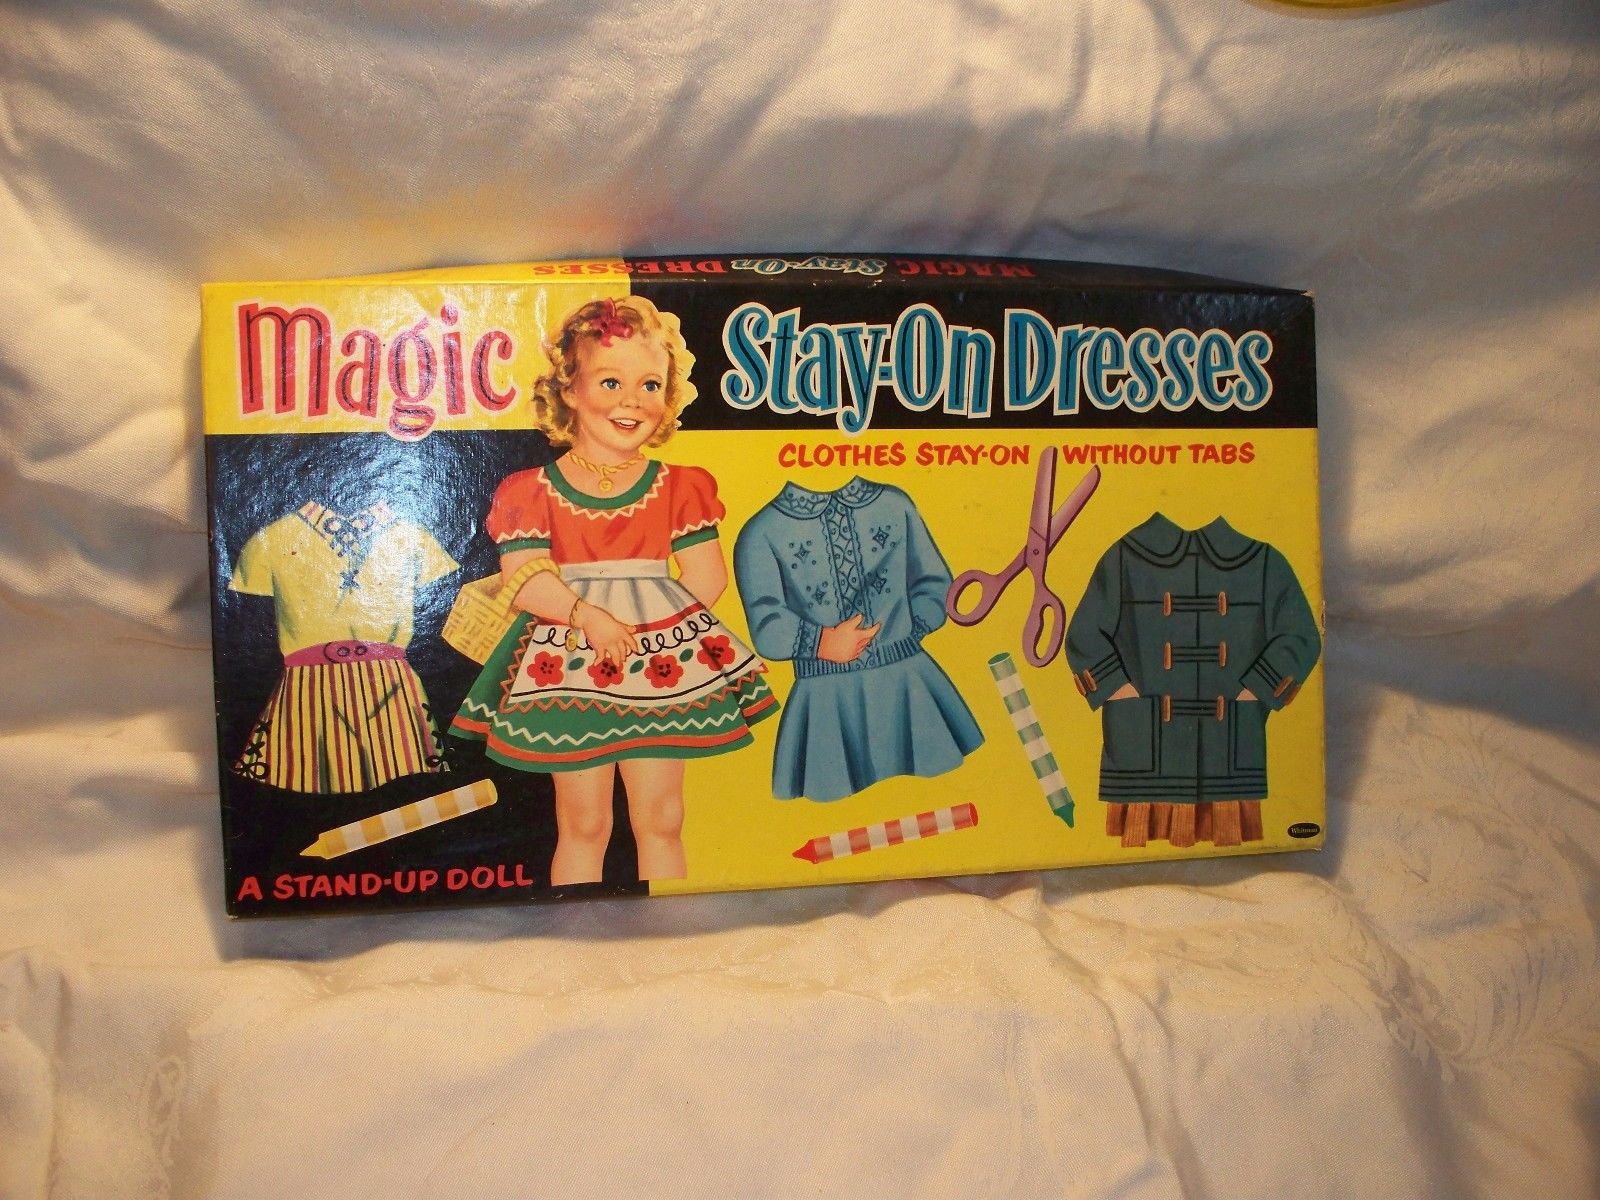 Magic Stay-on Dresses with Doll by Whitman